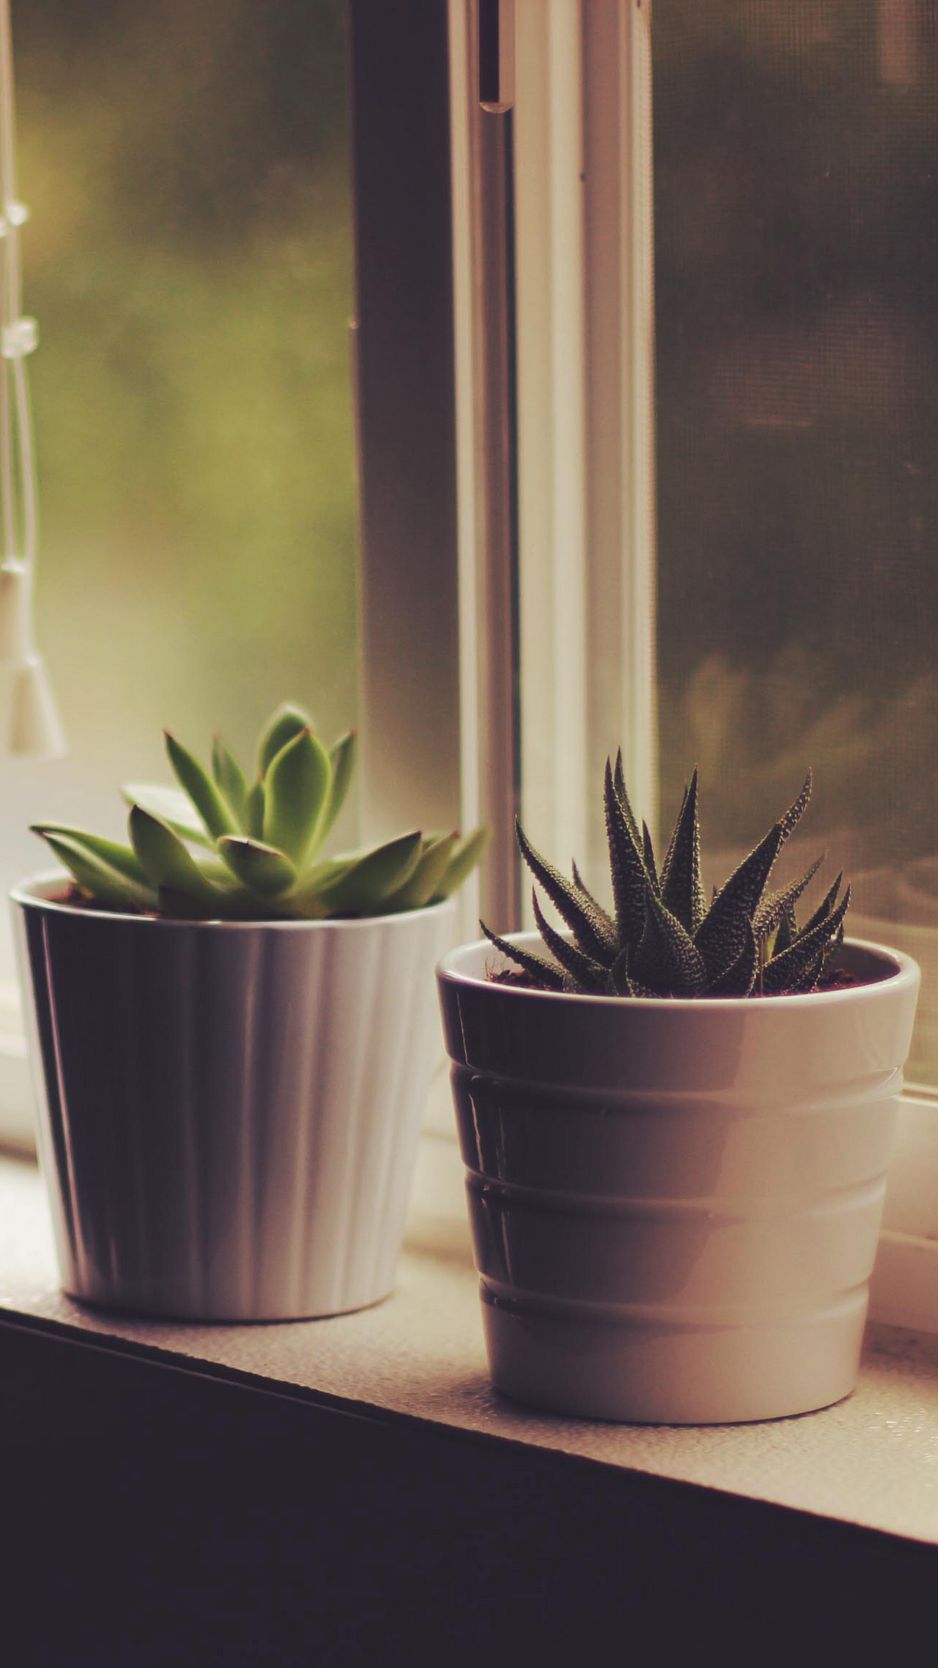 Download Wallpaper 938x1668 Flower Pots, Window Sill, Indoor Plants Iphone 8 7 6s 6 For Parallax HD Background